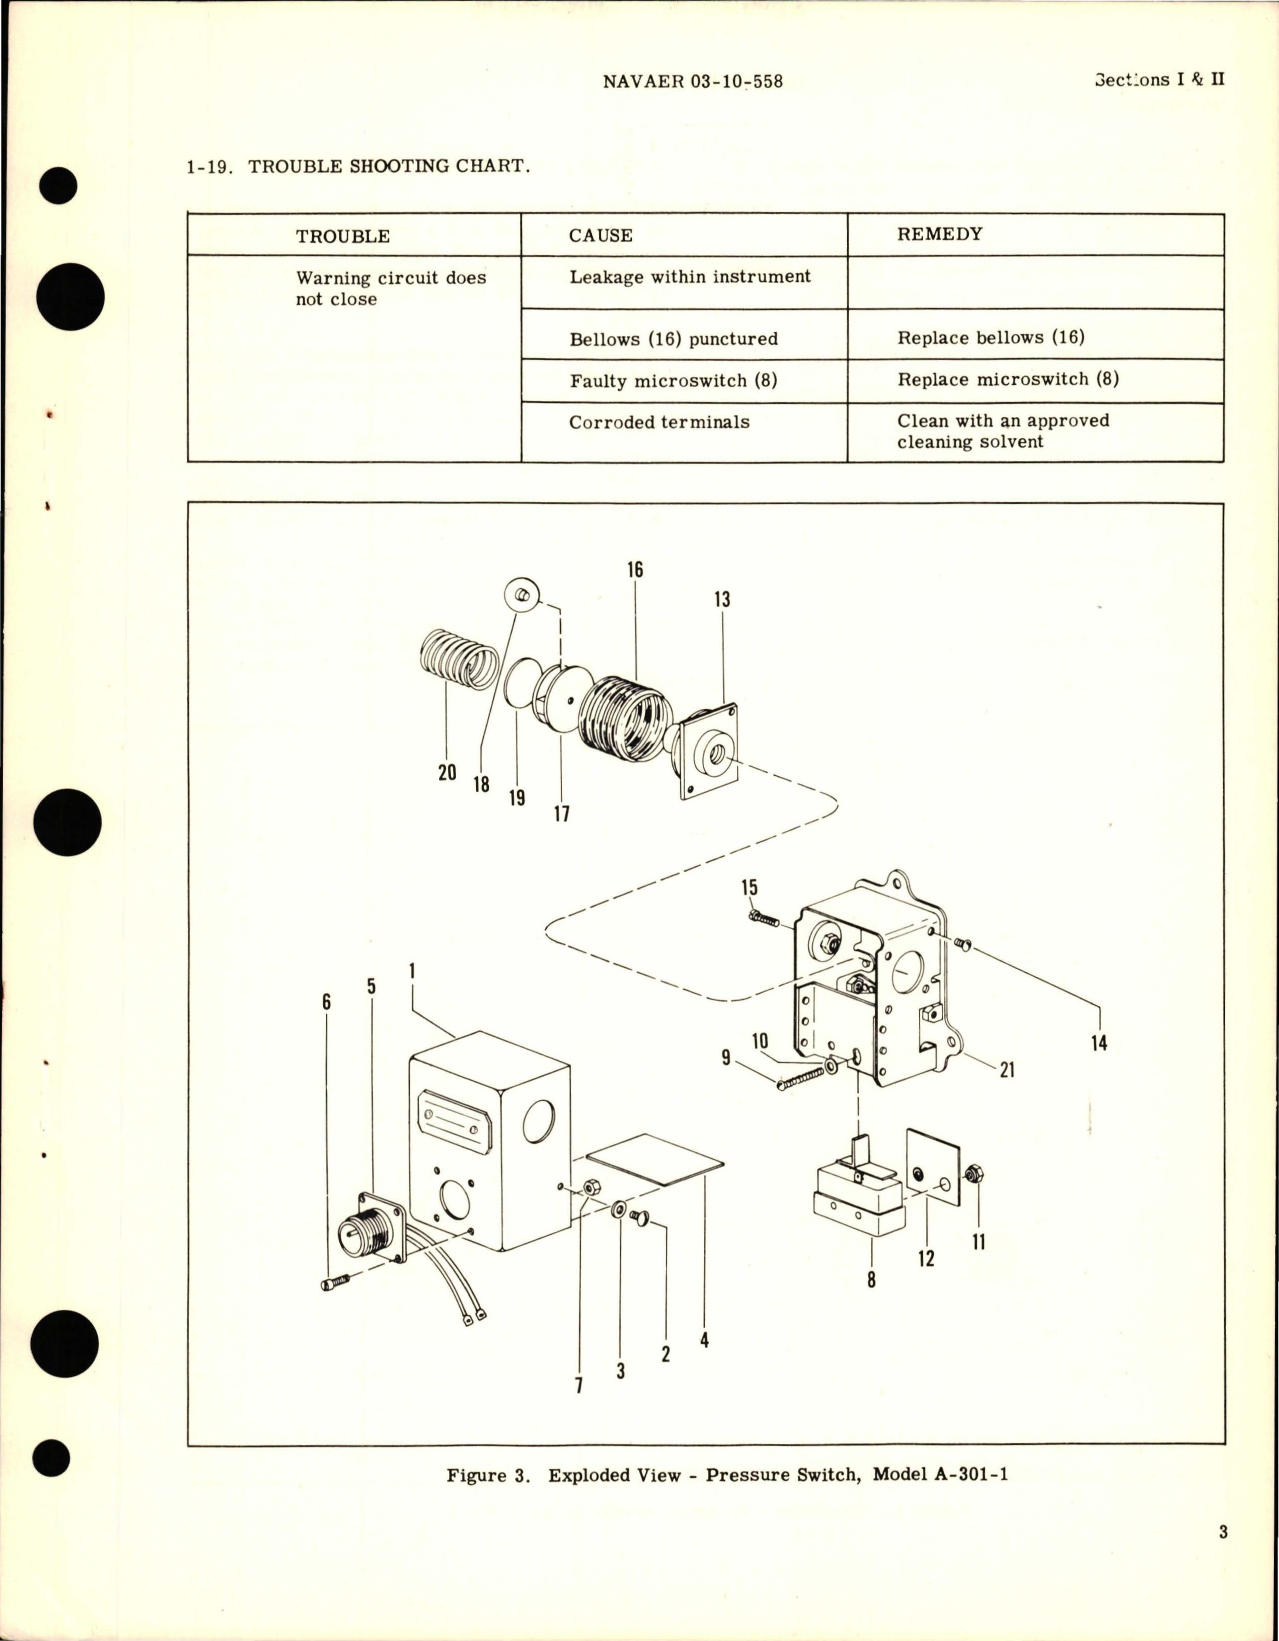 Sample page 5 from AirCorps Library document: Overhaul Instructions with Parts Catalog for Differential Pressure Switch - Part A-301-1